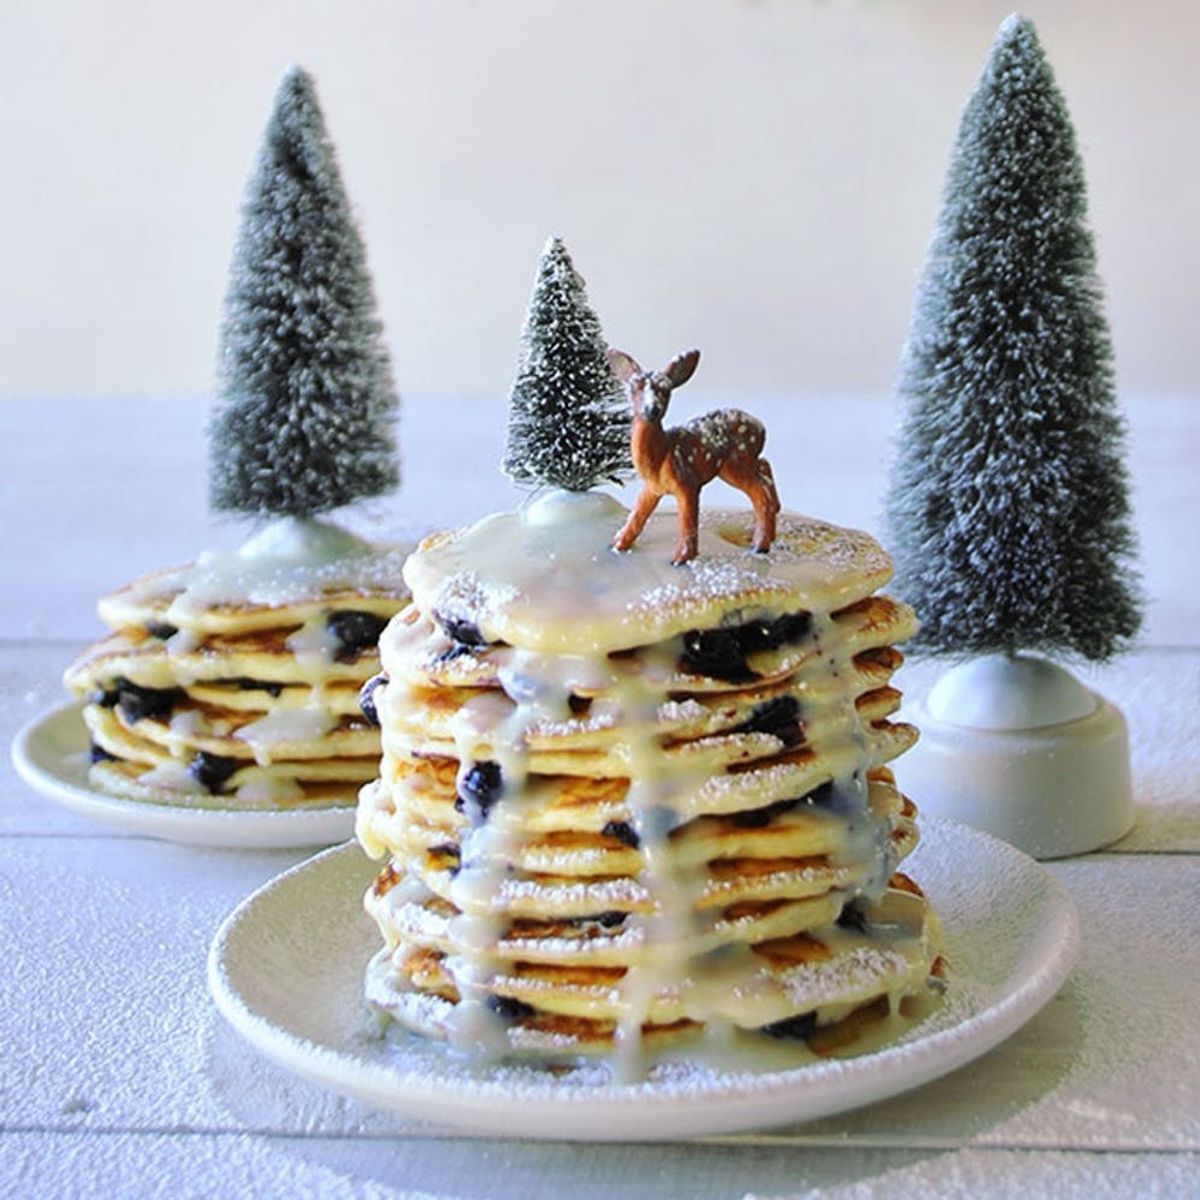 Make the Fluffiest Blueberry Pancakes Ever for Your Christmas Breakfast